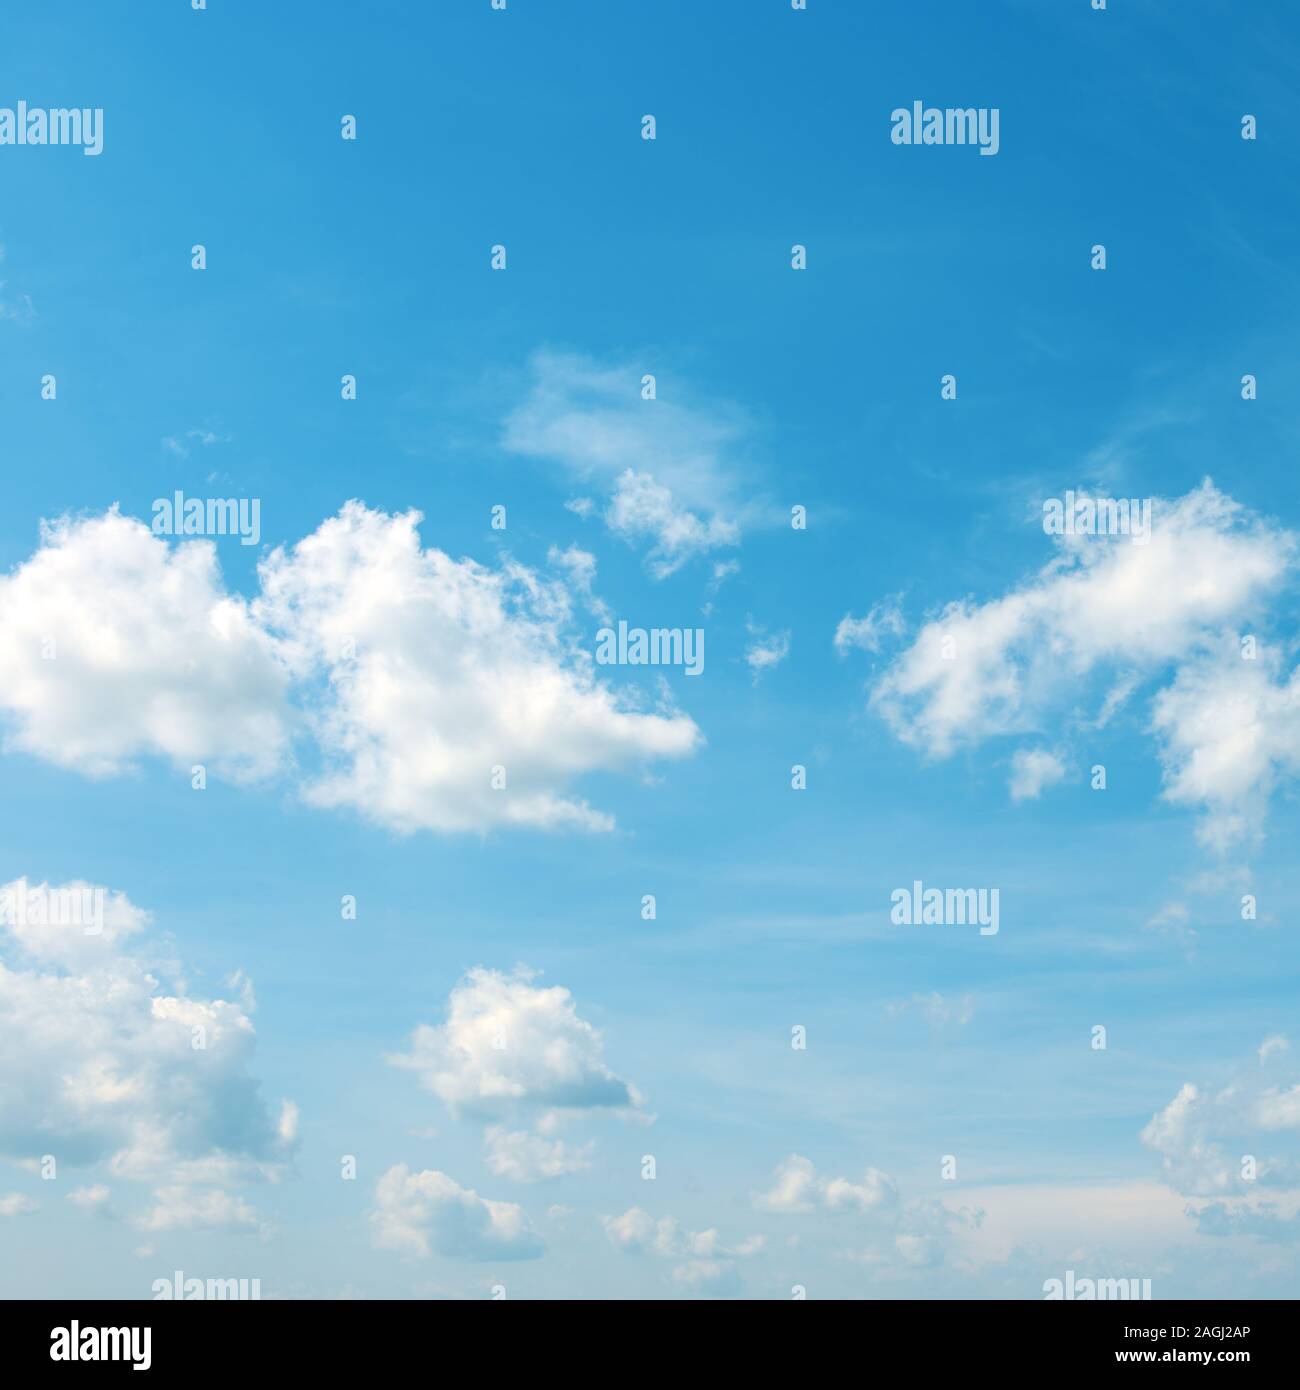 Heavenly landscape - white clouds in bright blue sky. Stock Photo